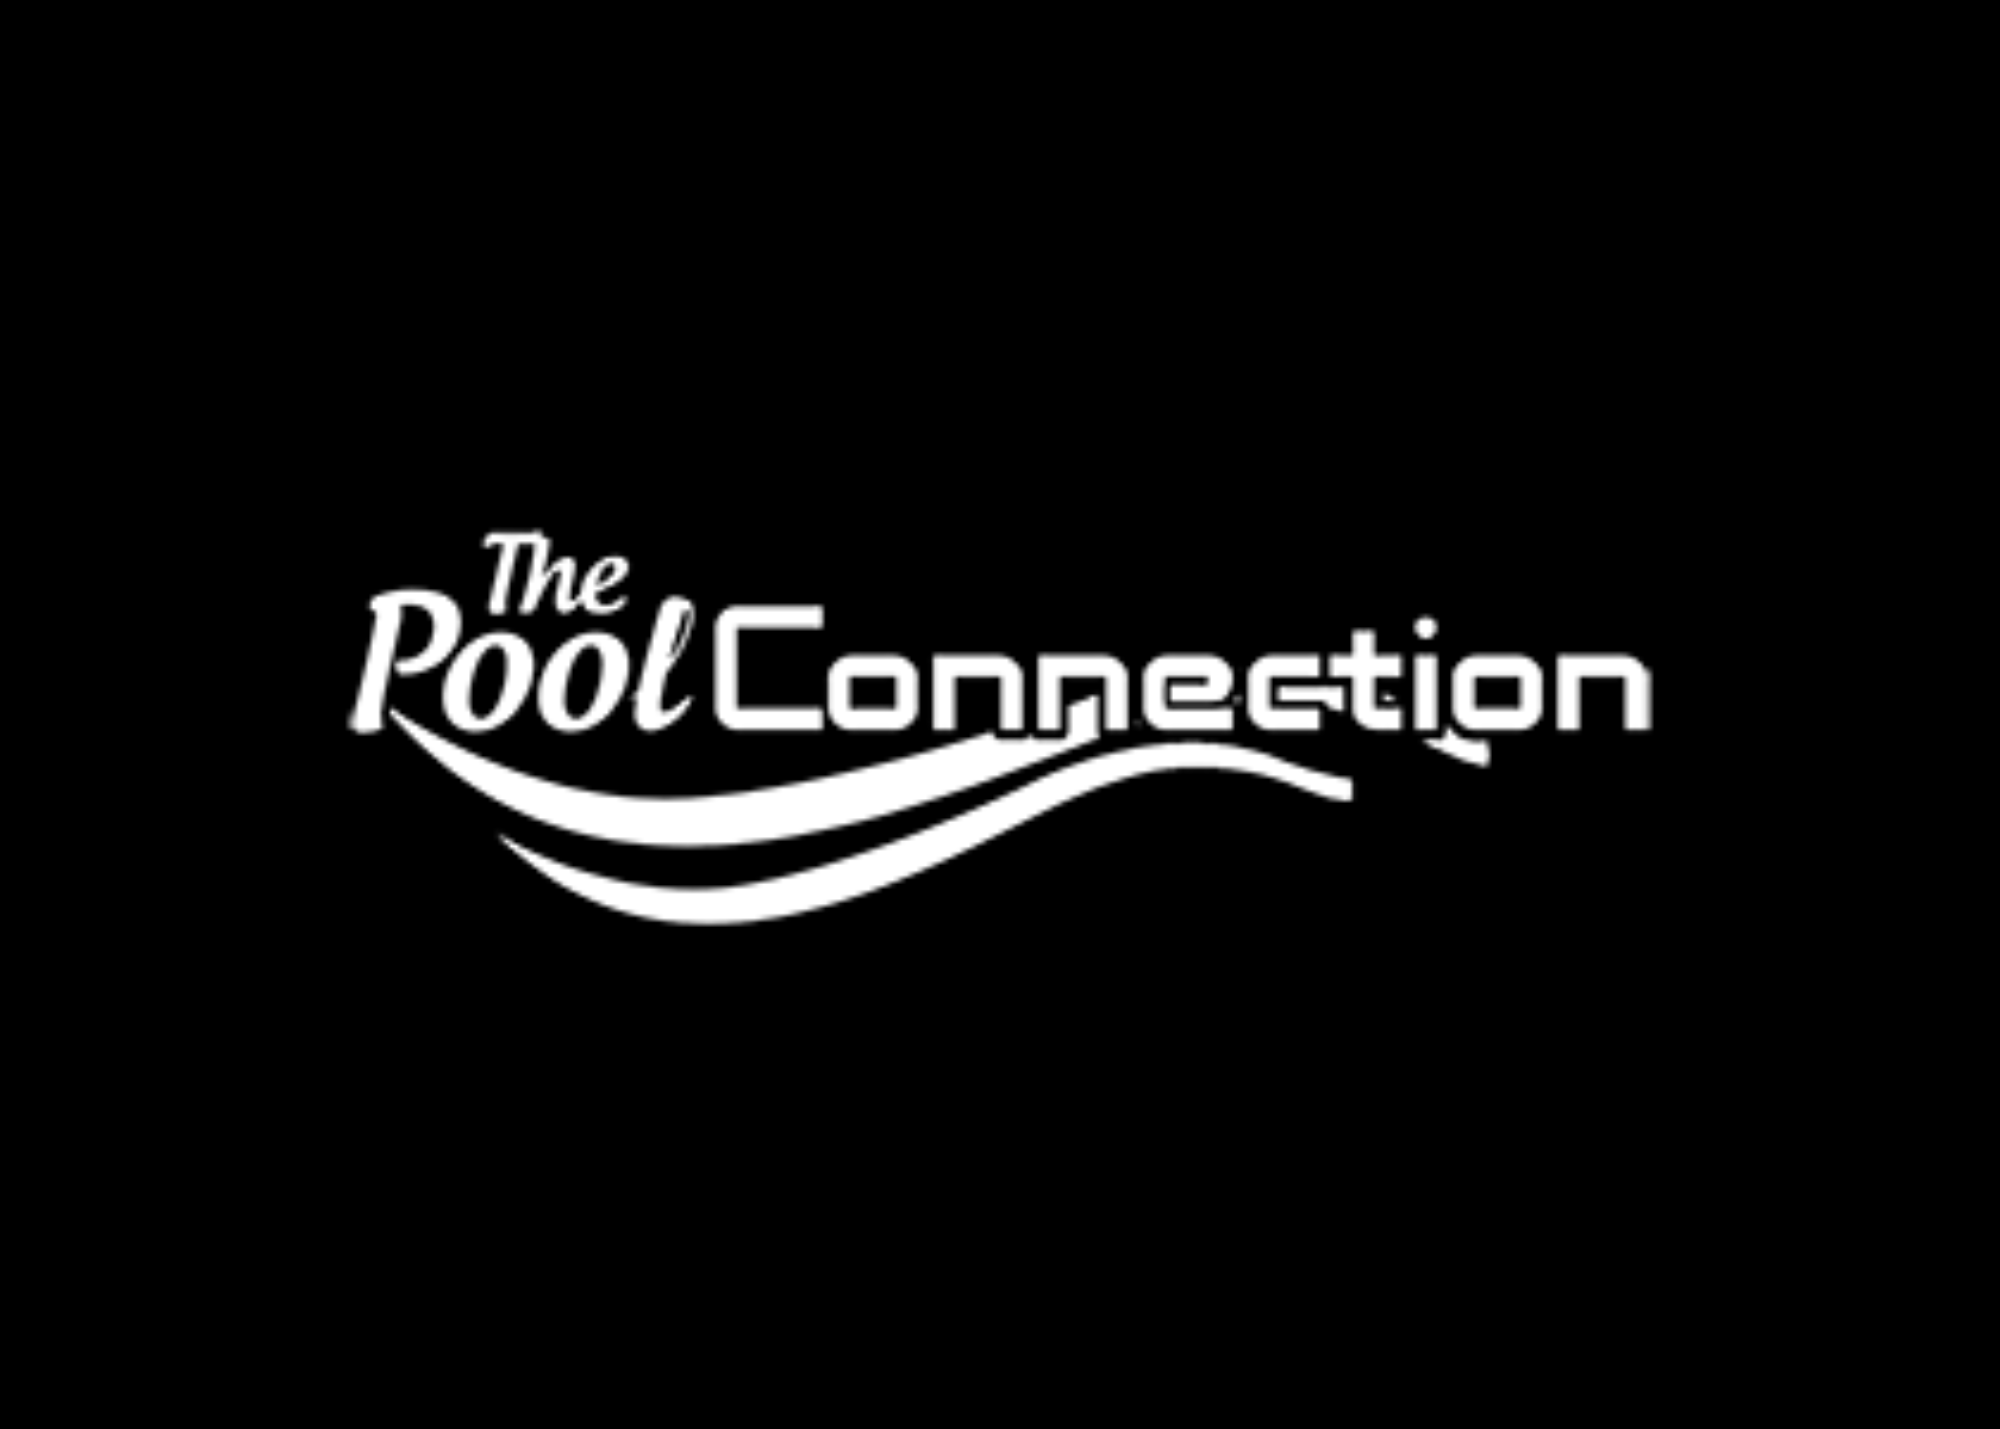 The pool connection logo 